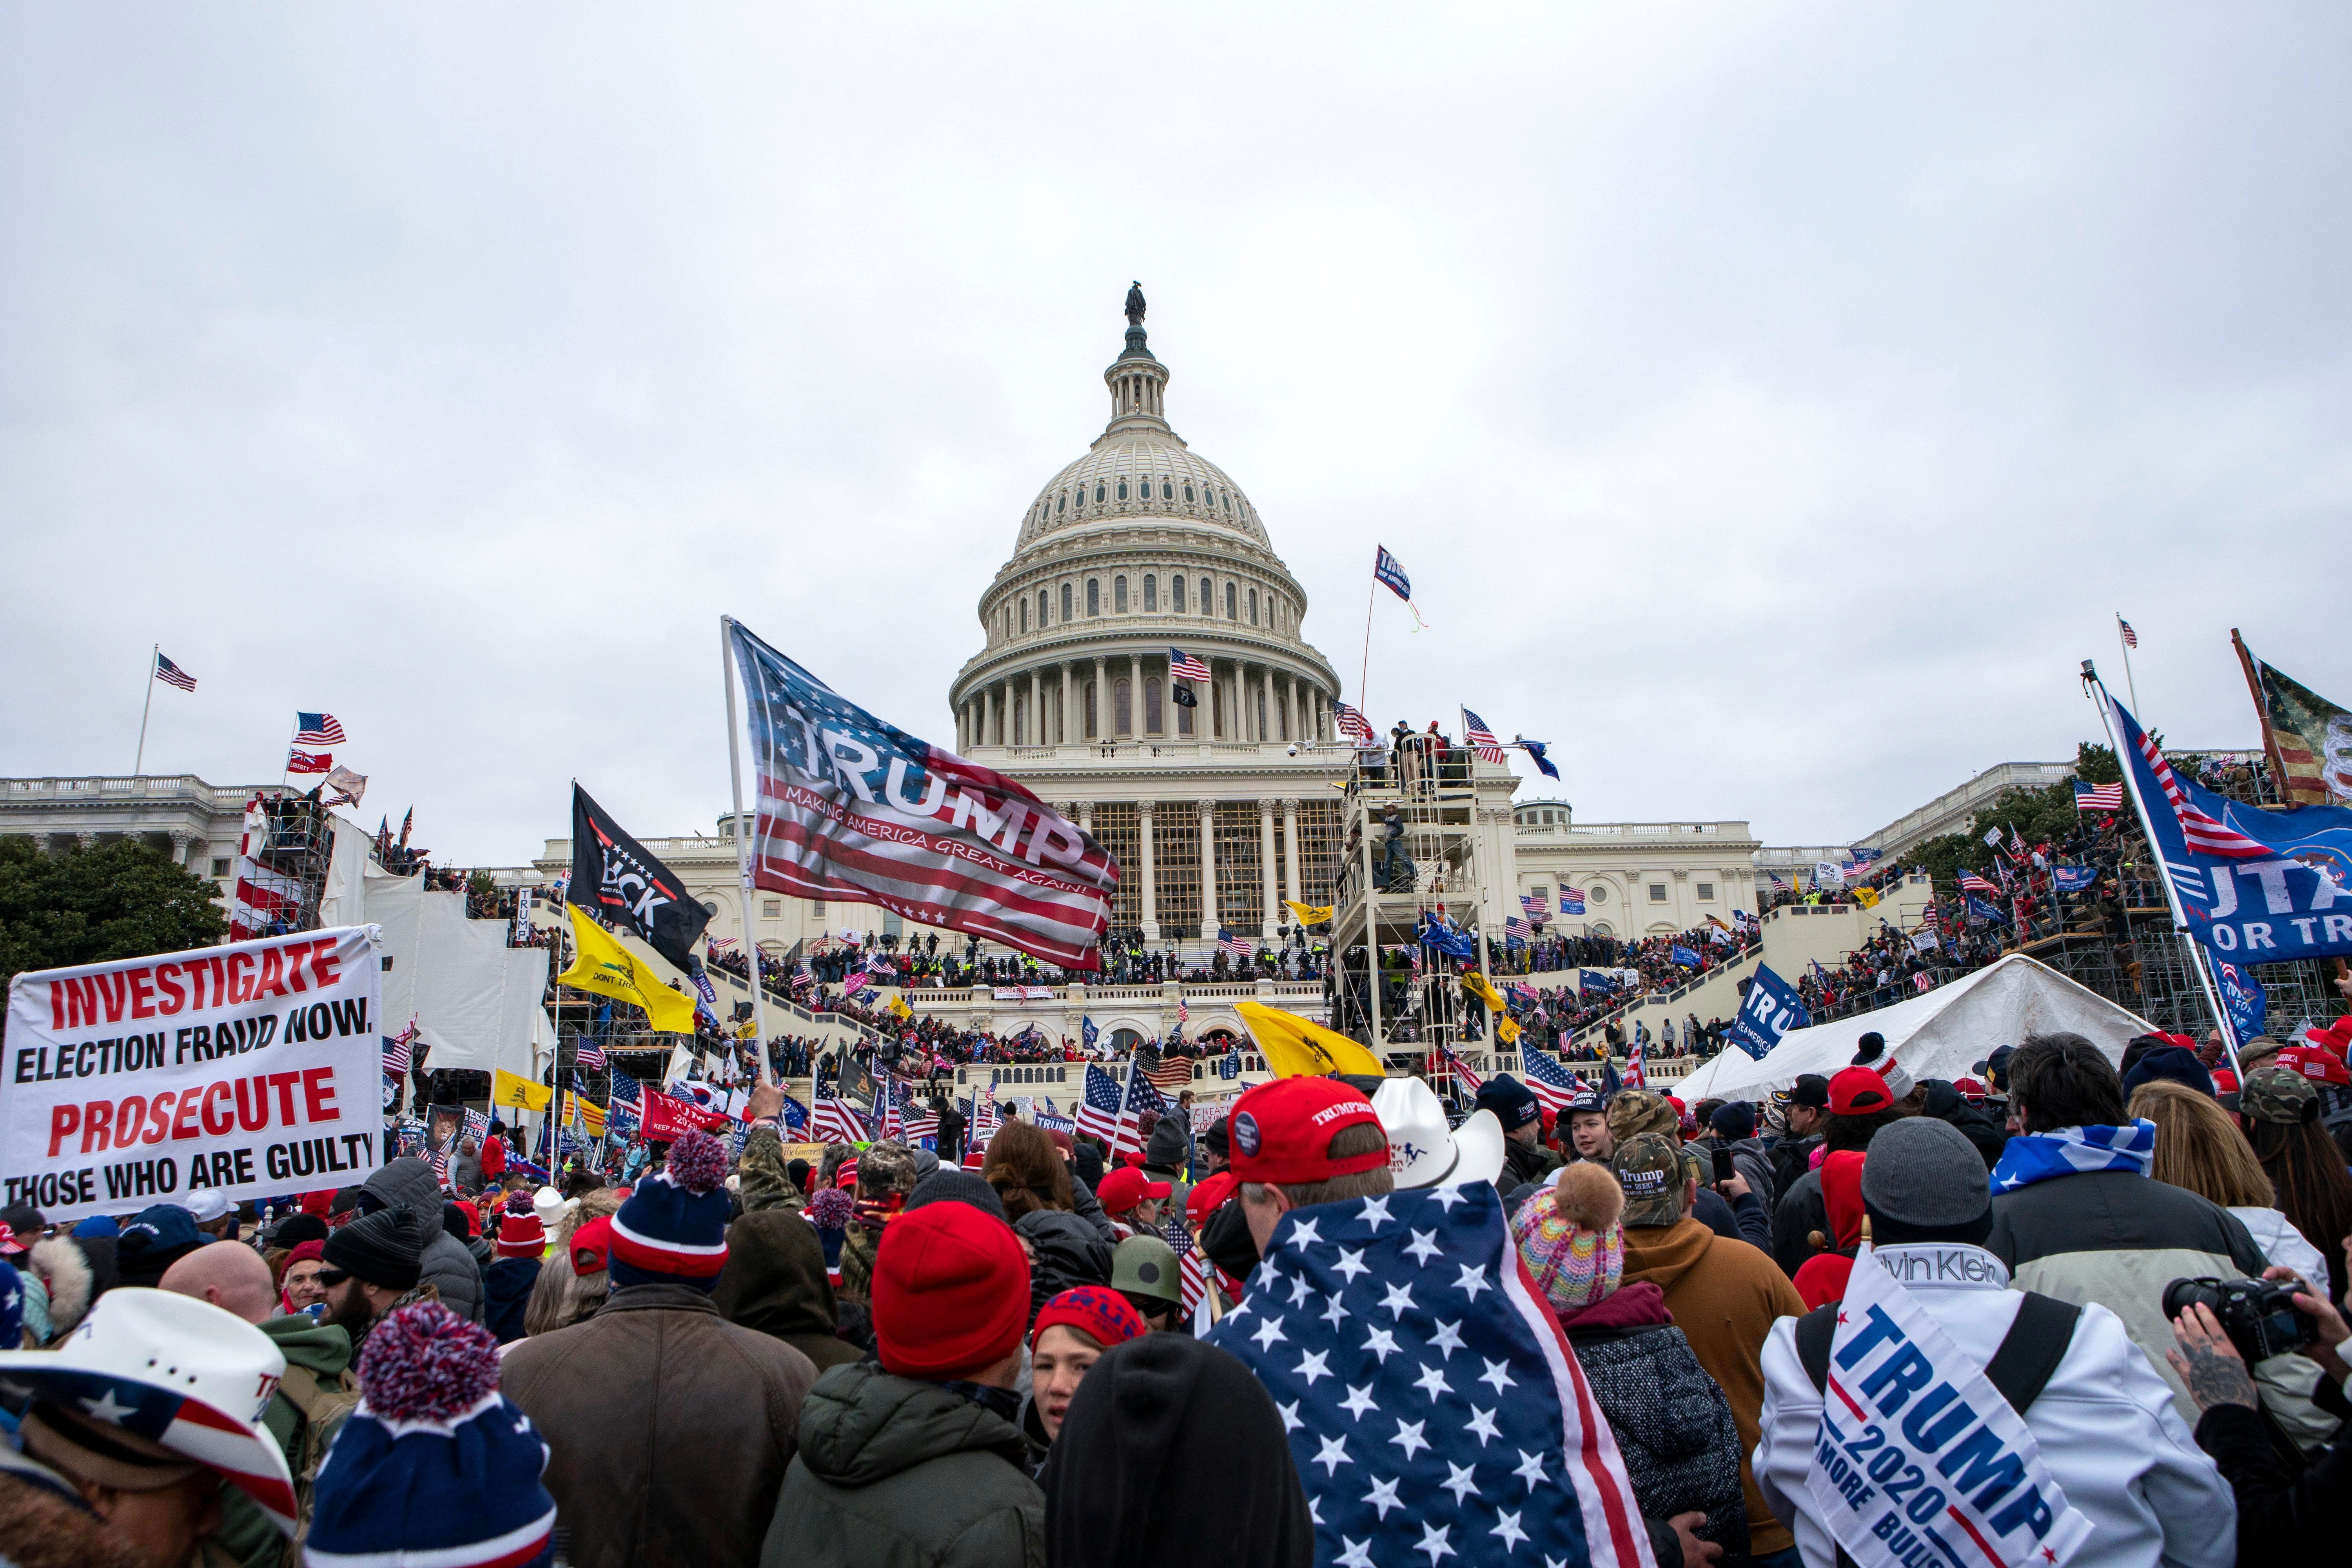 A mob loyal to Donald Trump stormed the US Capitol on 6 January, 2021.